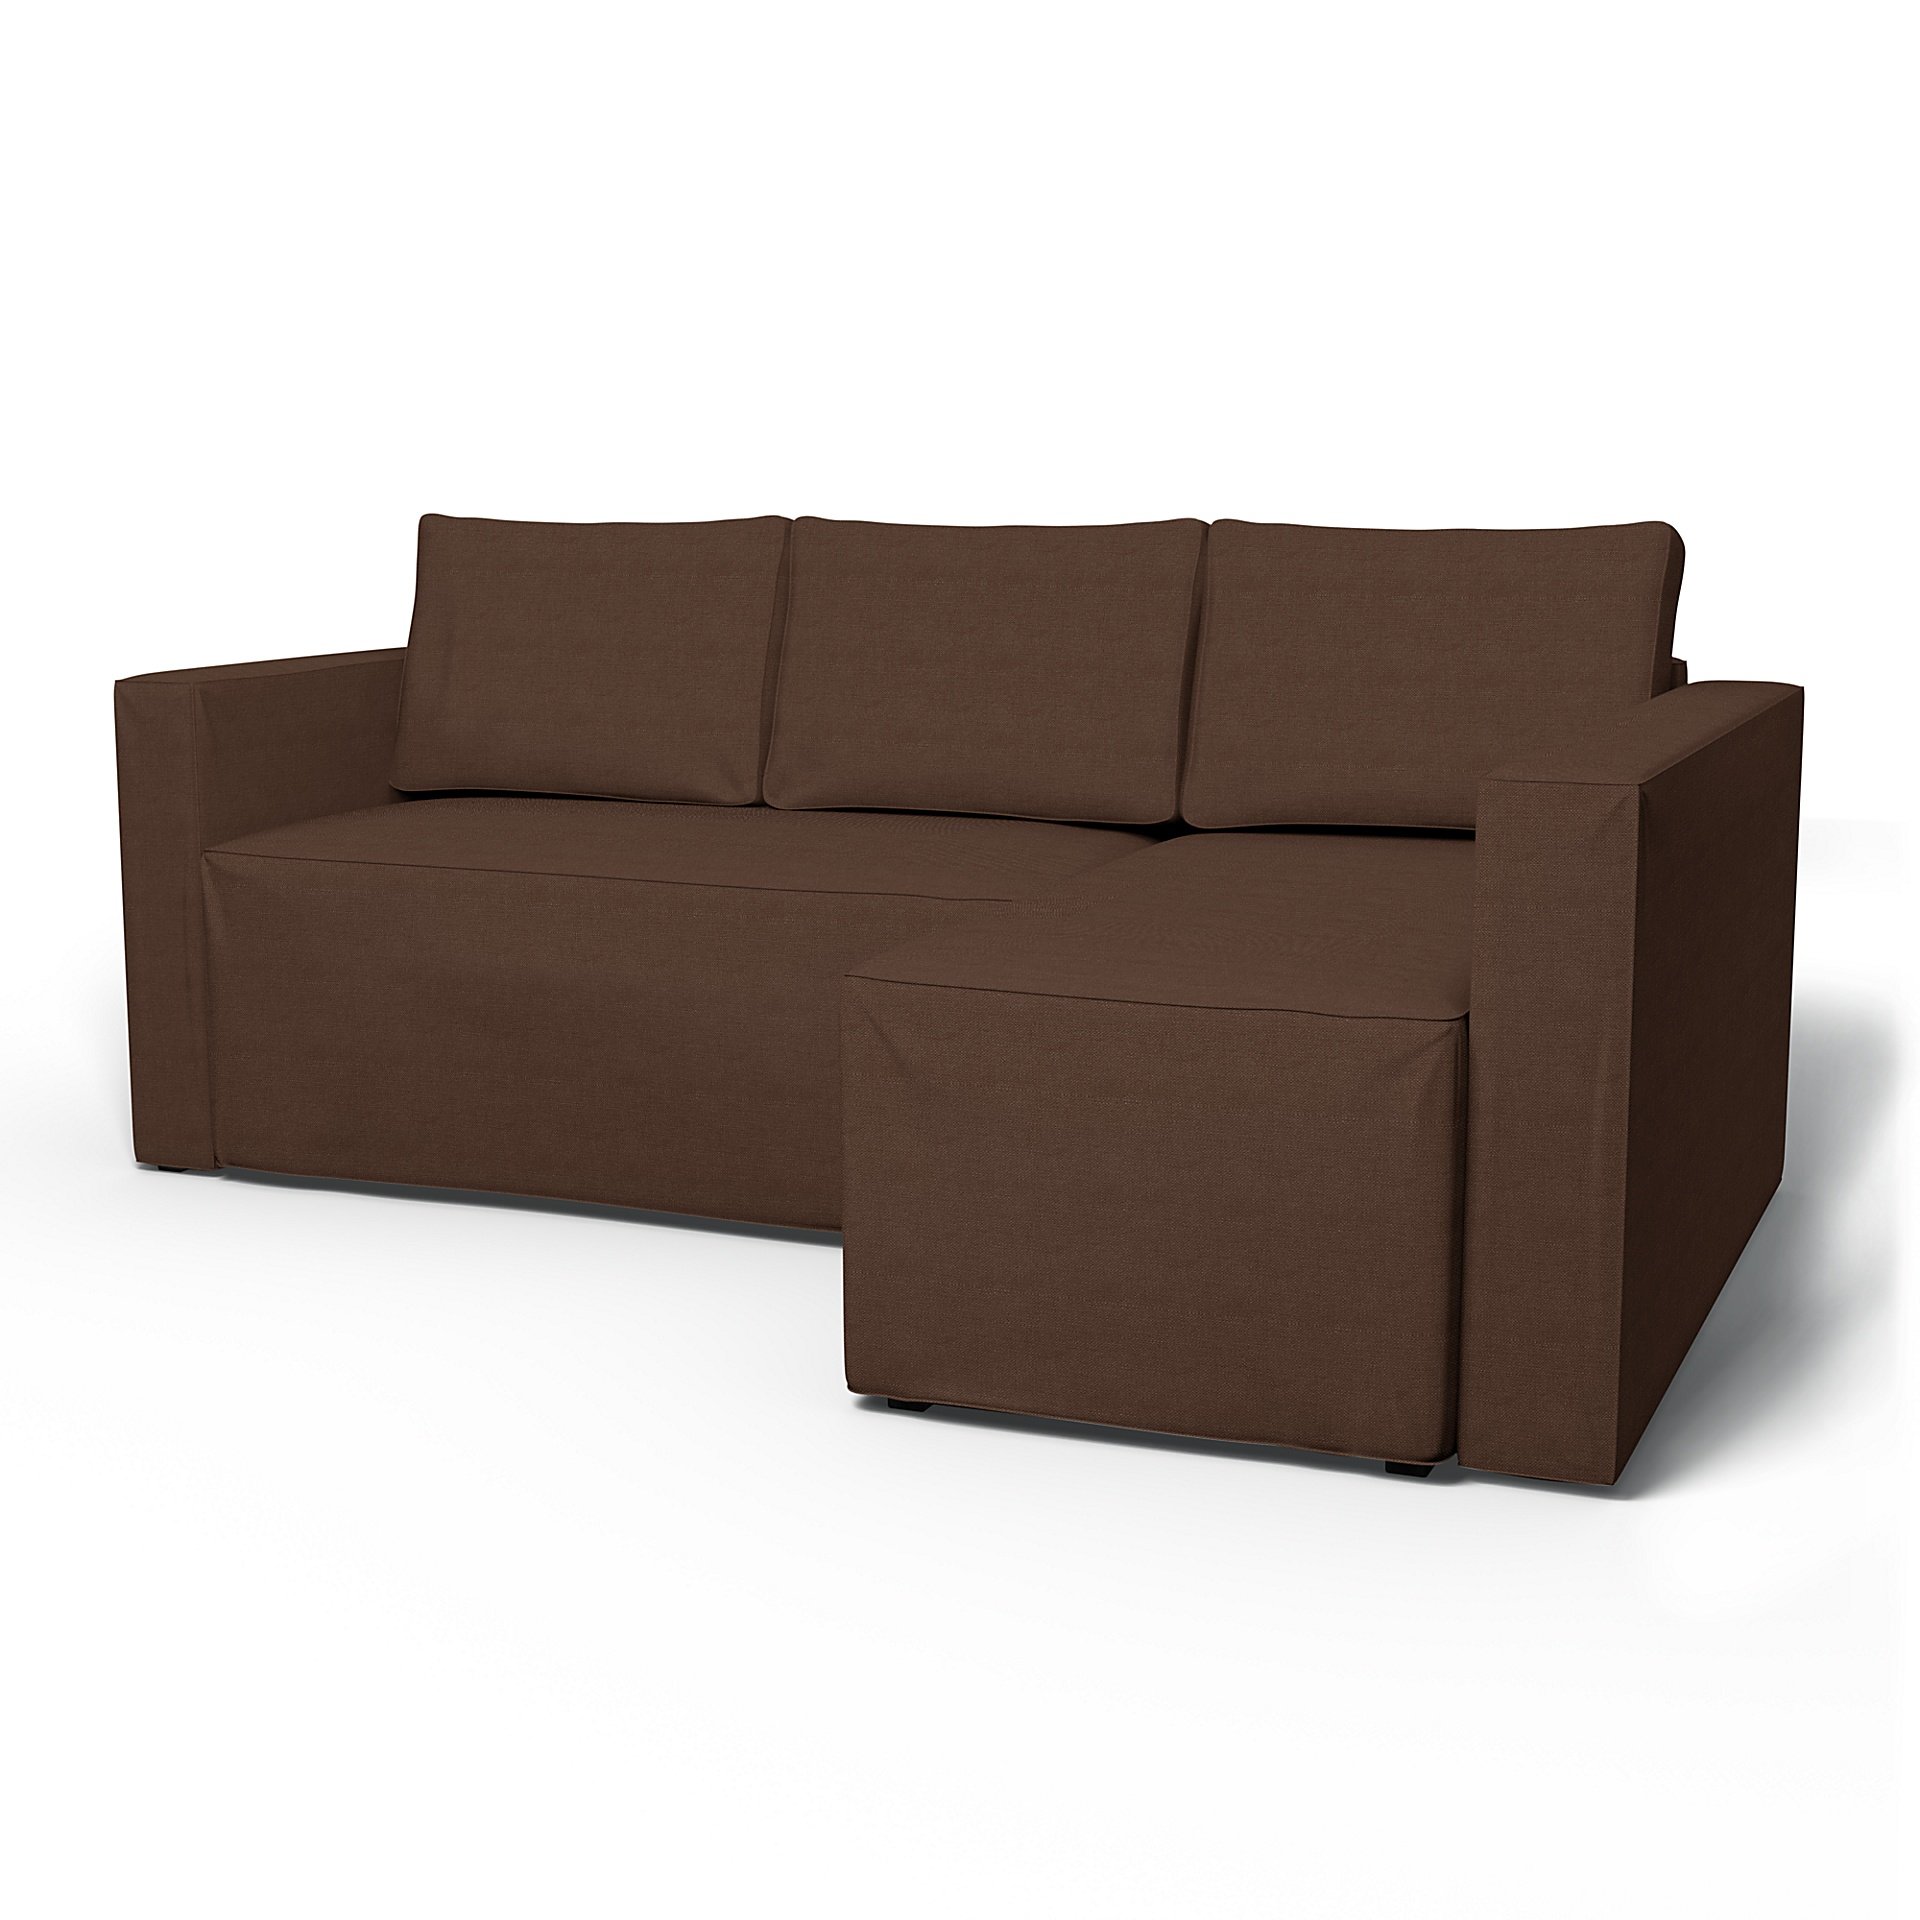 IKEA - Manstad Sofa Bed with Right Chaise Cover, Chocolate, Linen - Bemz